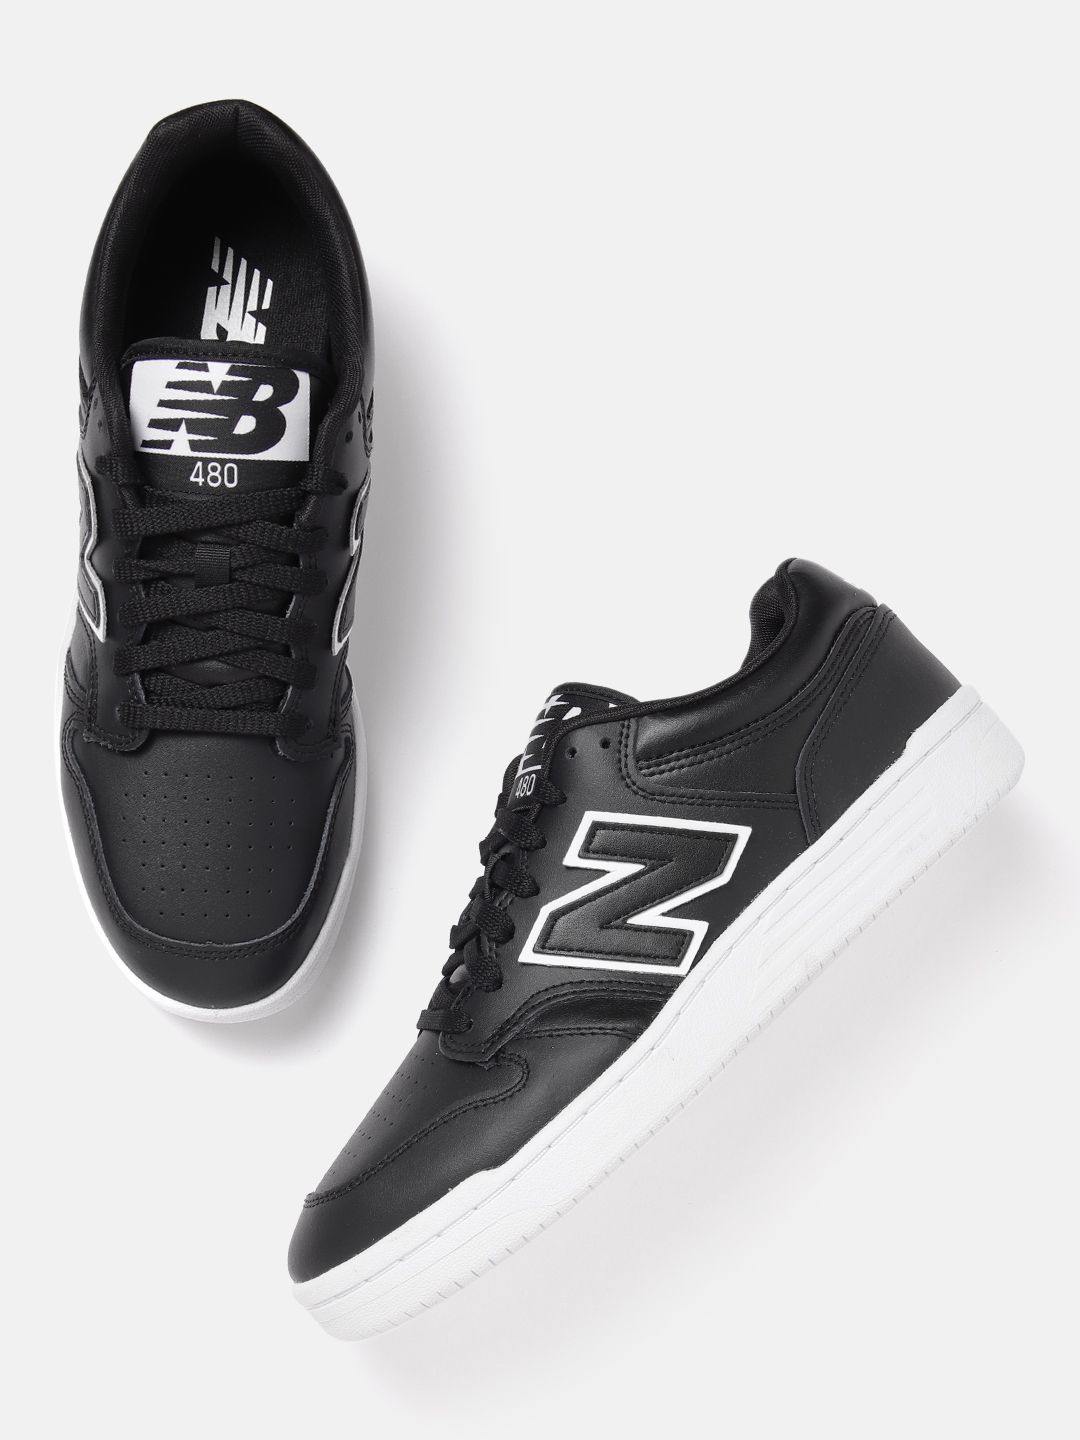 New Balance Men Perforated Detail Everyday BB480 Sports Shoes